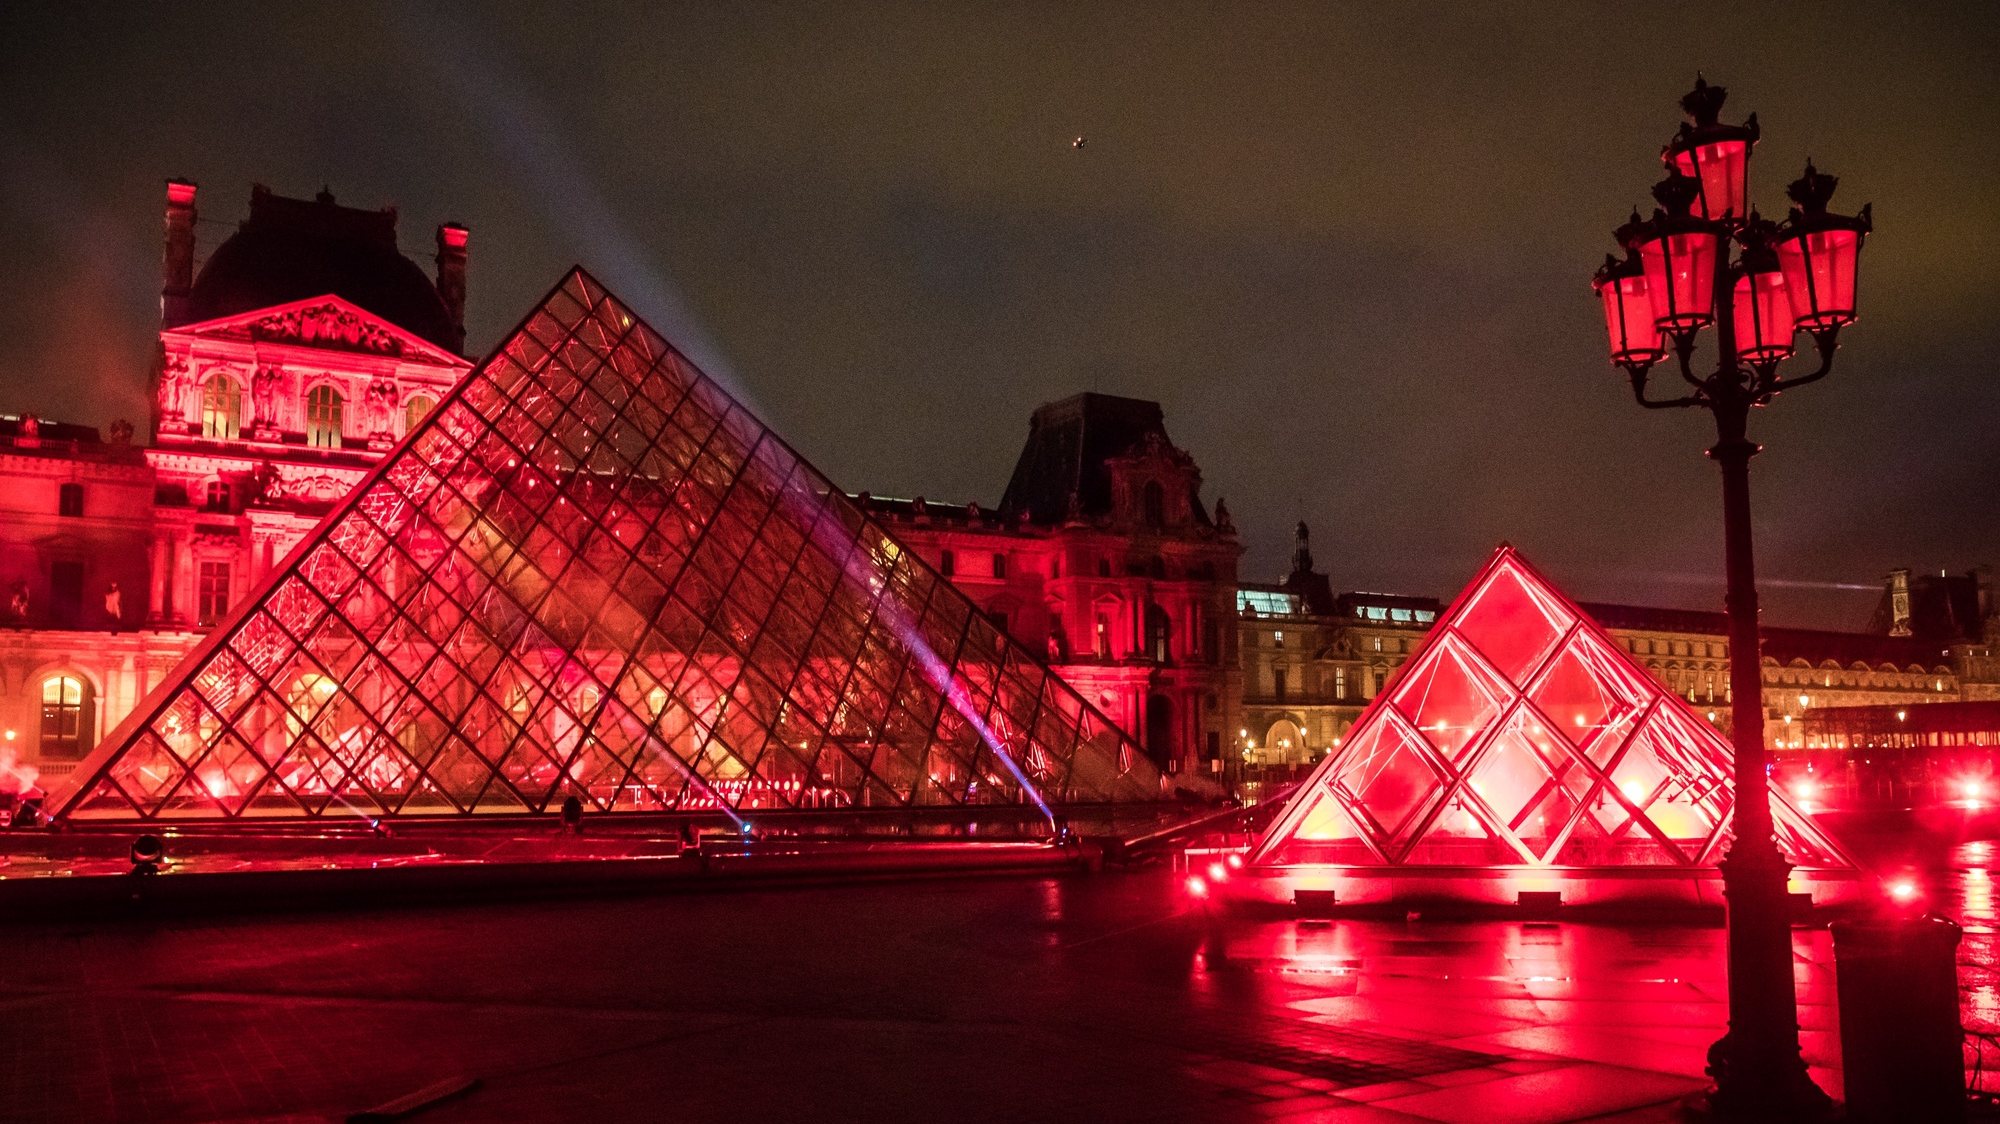 epa08910941 Lights are projected on the Louvre&#039;s Museum Pyramid during the tuning of the performance of the French Dj David Guetta in Paris, 29 December 2020 (issued 30 December 2020). The third edition of the Guetta&#039;s &#039;United at Home&#039; concert will be broadcasted 31 December for the New Year Eve celebration on social media and TV. Due to the still high number of Covid-19 cases, a curfew is imposed between 8 pm and 6 am effective from 15 December 2020 and all the streets gathering or celebrations are cancelled.  EPA/CHRISTOPHE PETIT TESSON